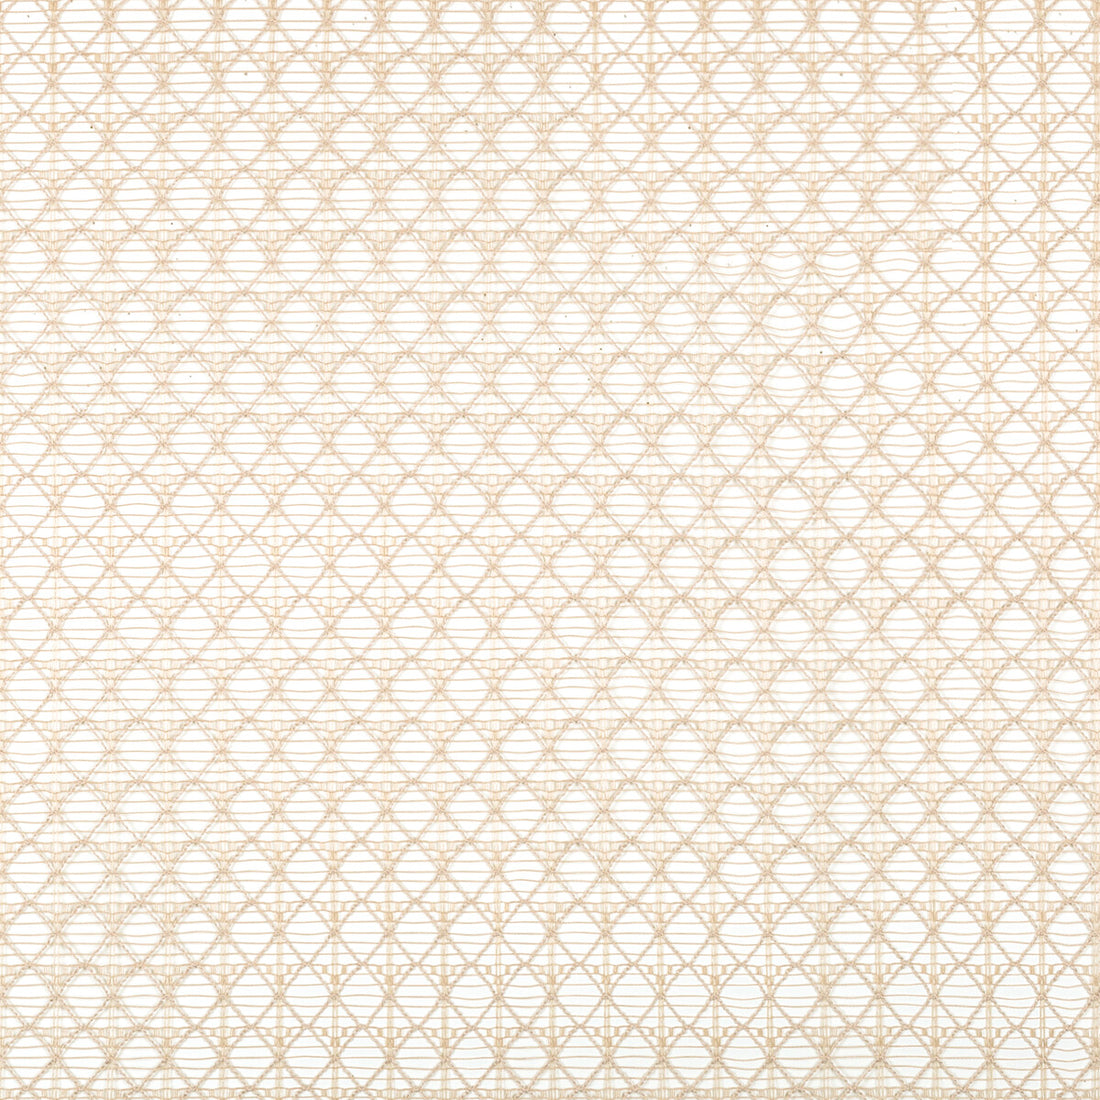 Intersecting fabric in flax color - pattern 4824.116.0 - by Kravet Contract